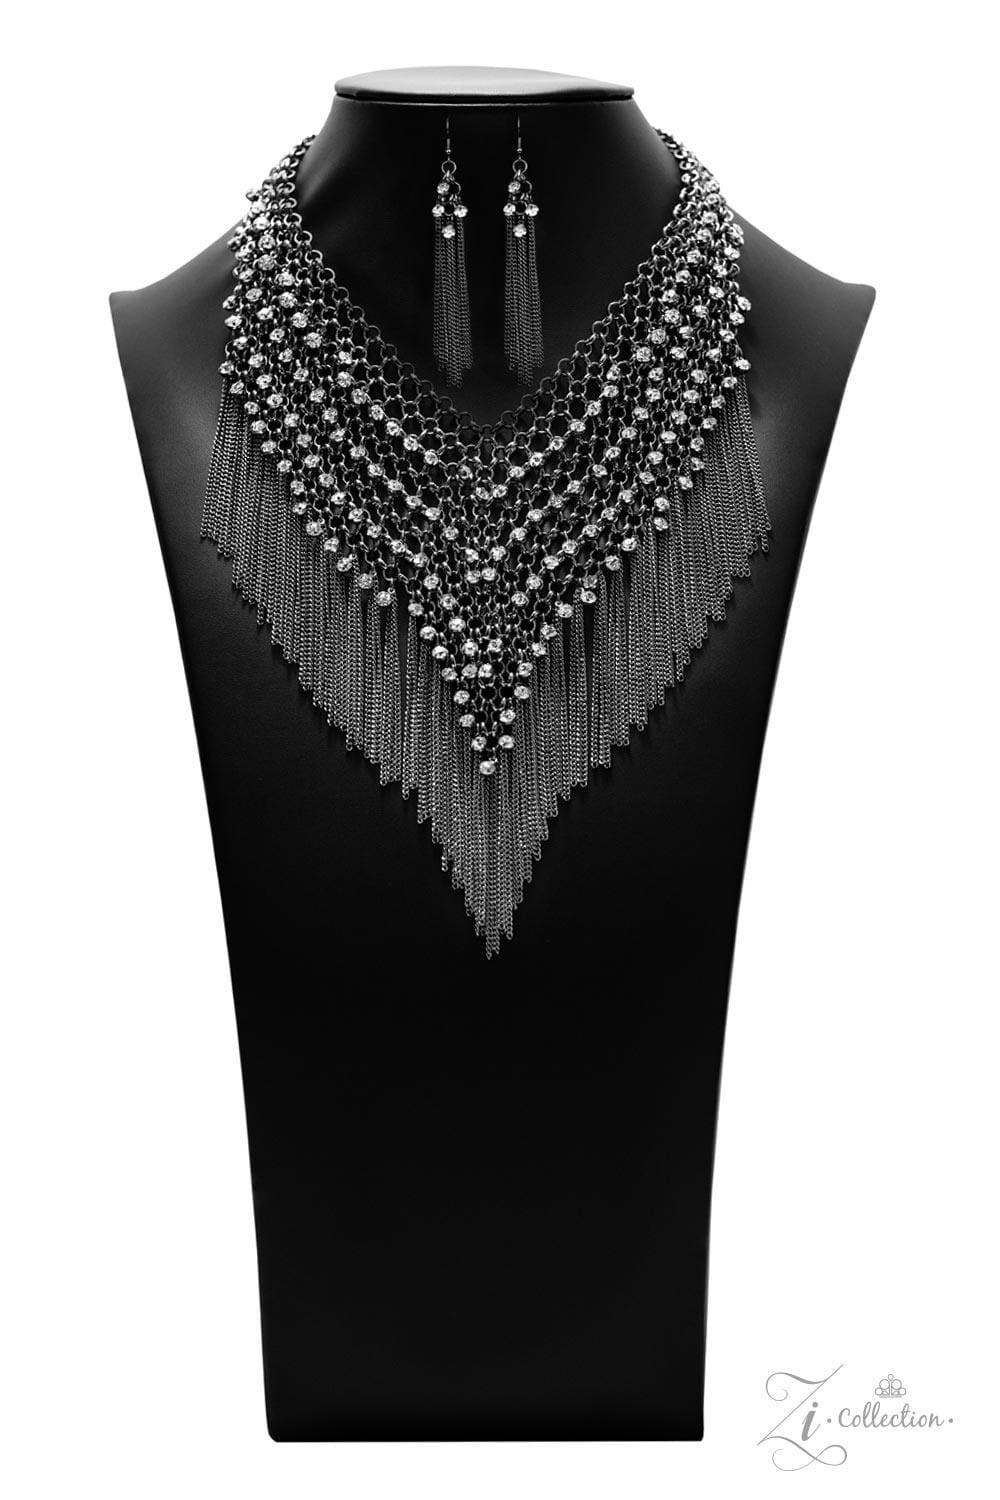 Paparazzi Accessories - Impulsive - 2021 Zi Collection Necklace - Bling by JessieK